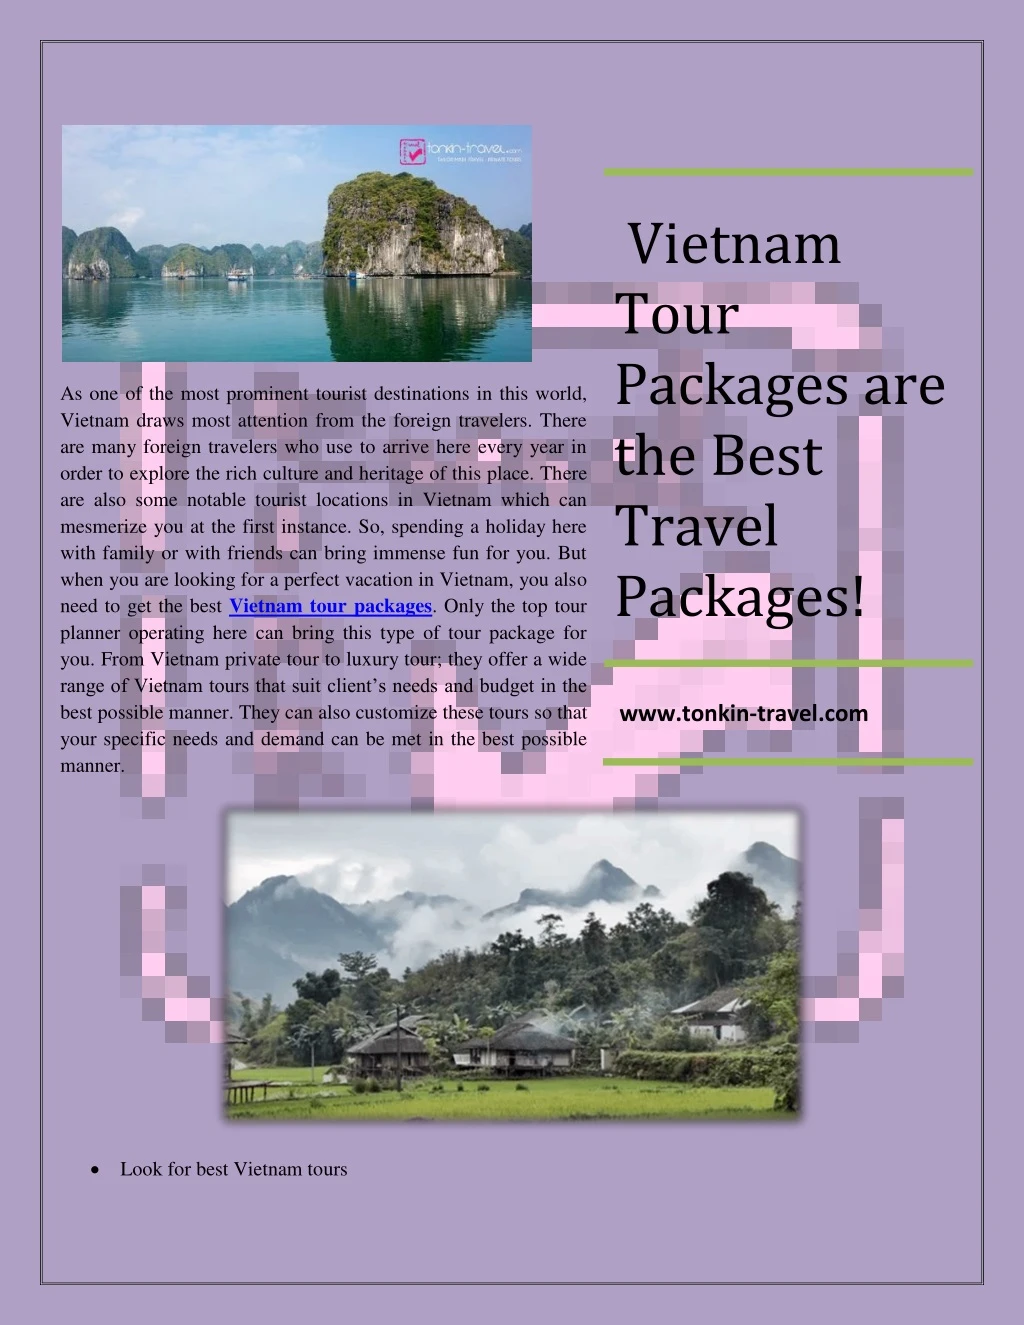 vietnam tour packages are the best travel packages n.